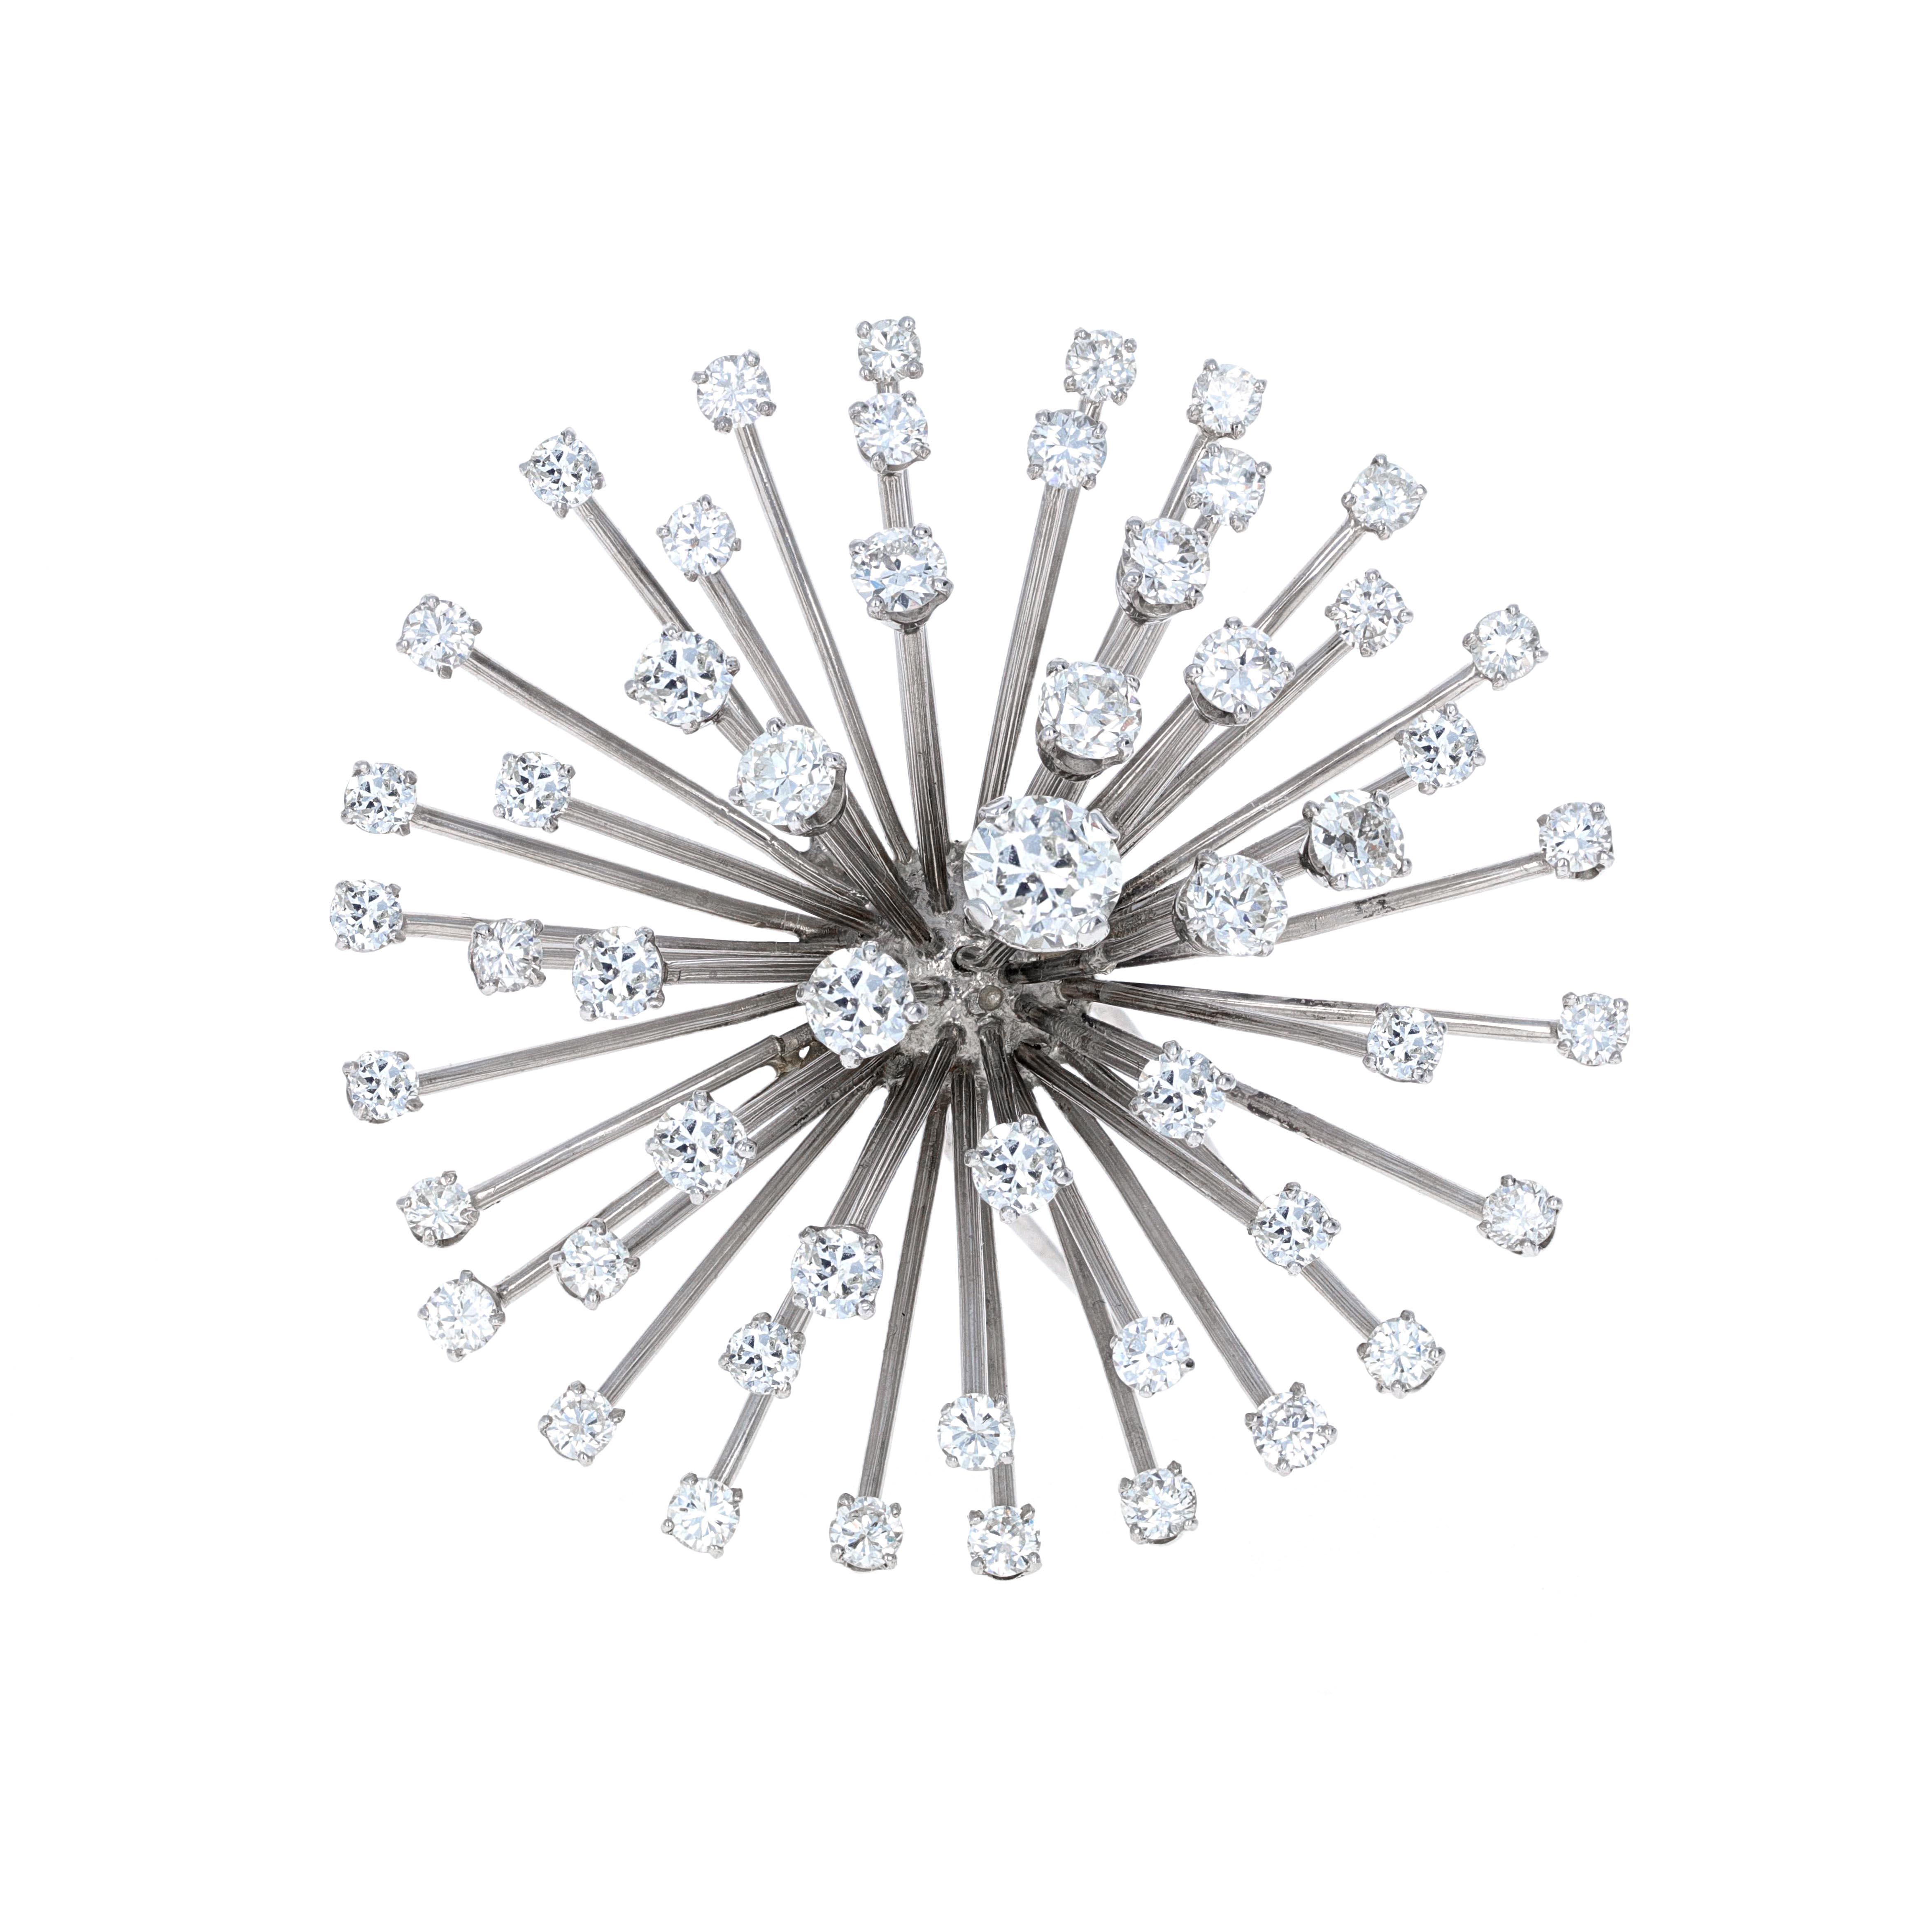 Vintage 18 karat white gold diamond firework brooch. The diamonds are white in color and eye clean. The center stone weighs 1.03 carats.


